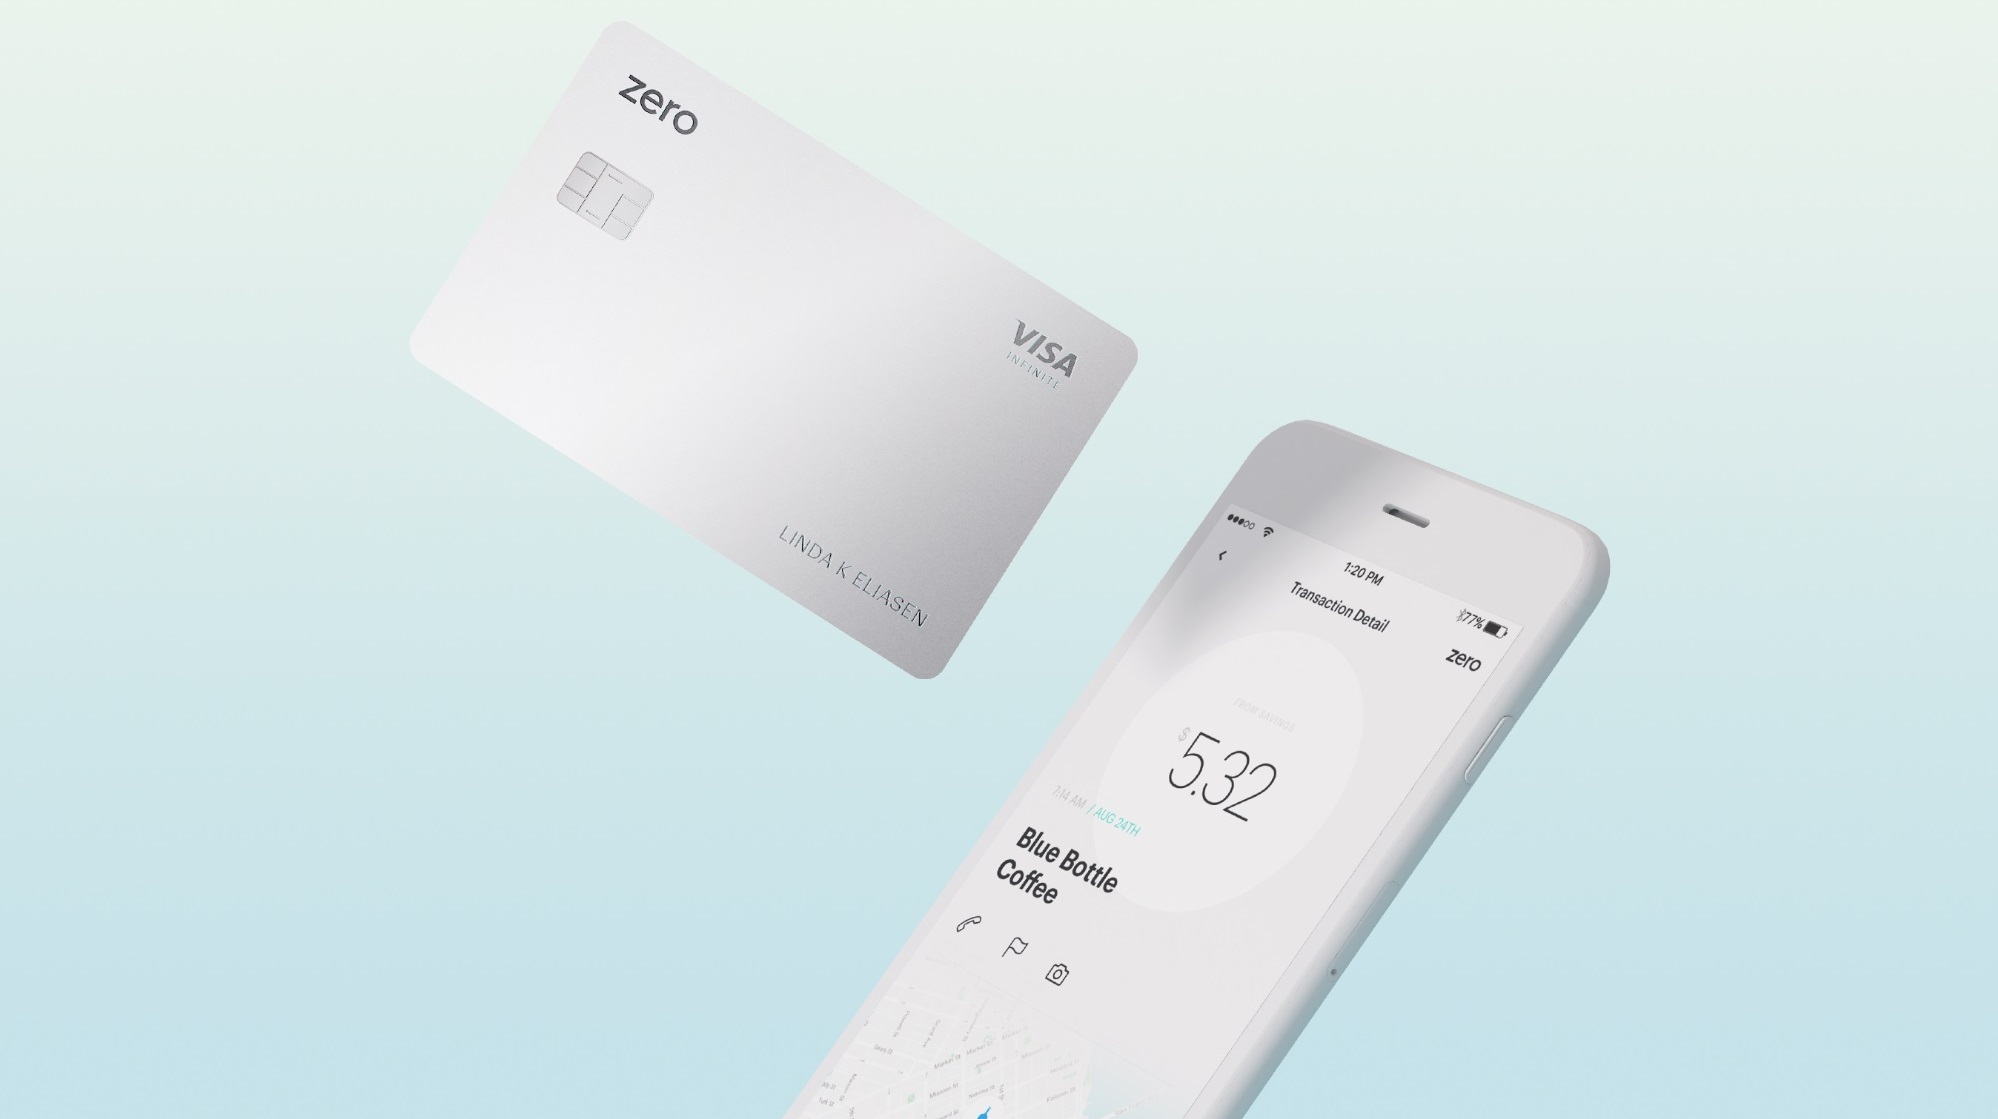 Introducing Zero: Acts Like a Debit Card, Earns Credit Card Rewards